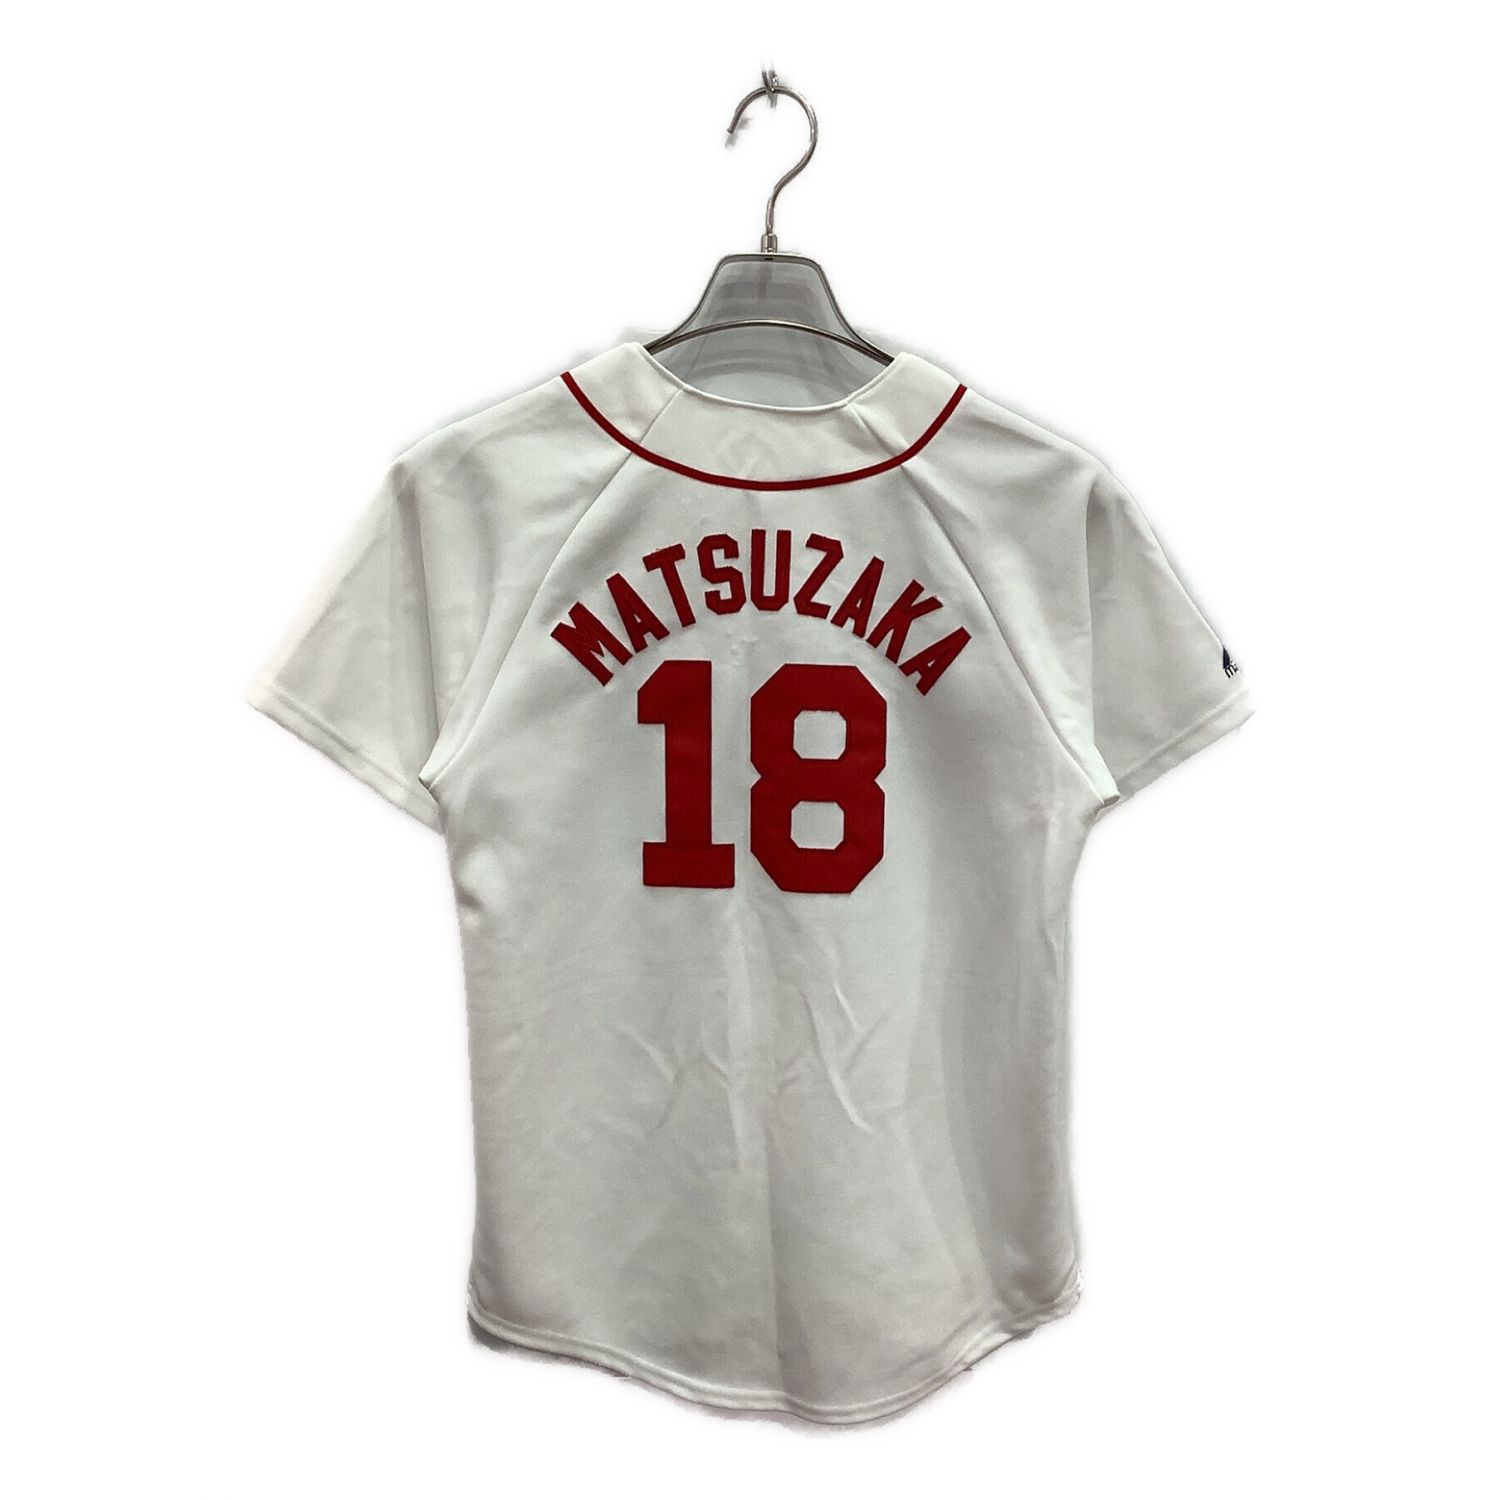 RED SOX 応援グッズ SIZE L キッズ ユニフォーム 松坂大輔